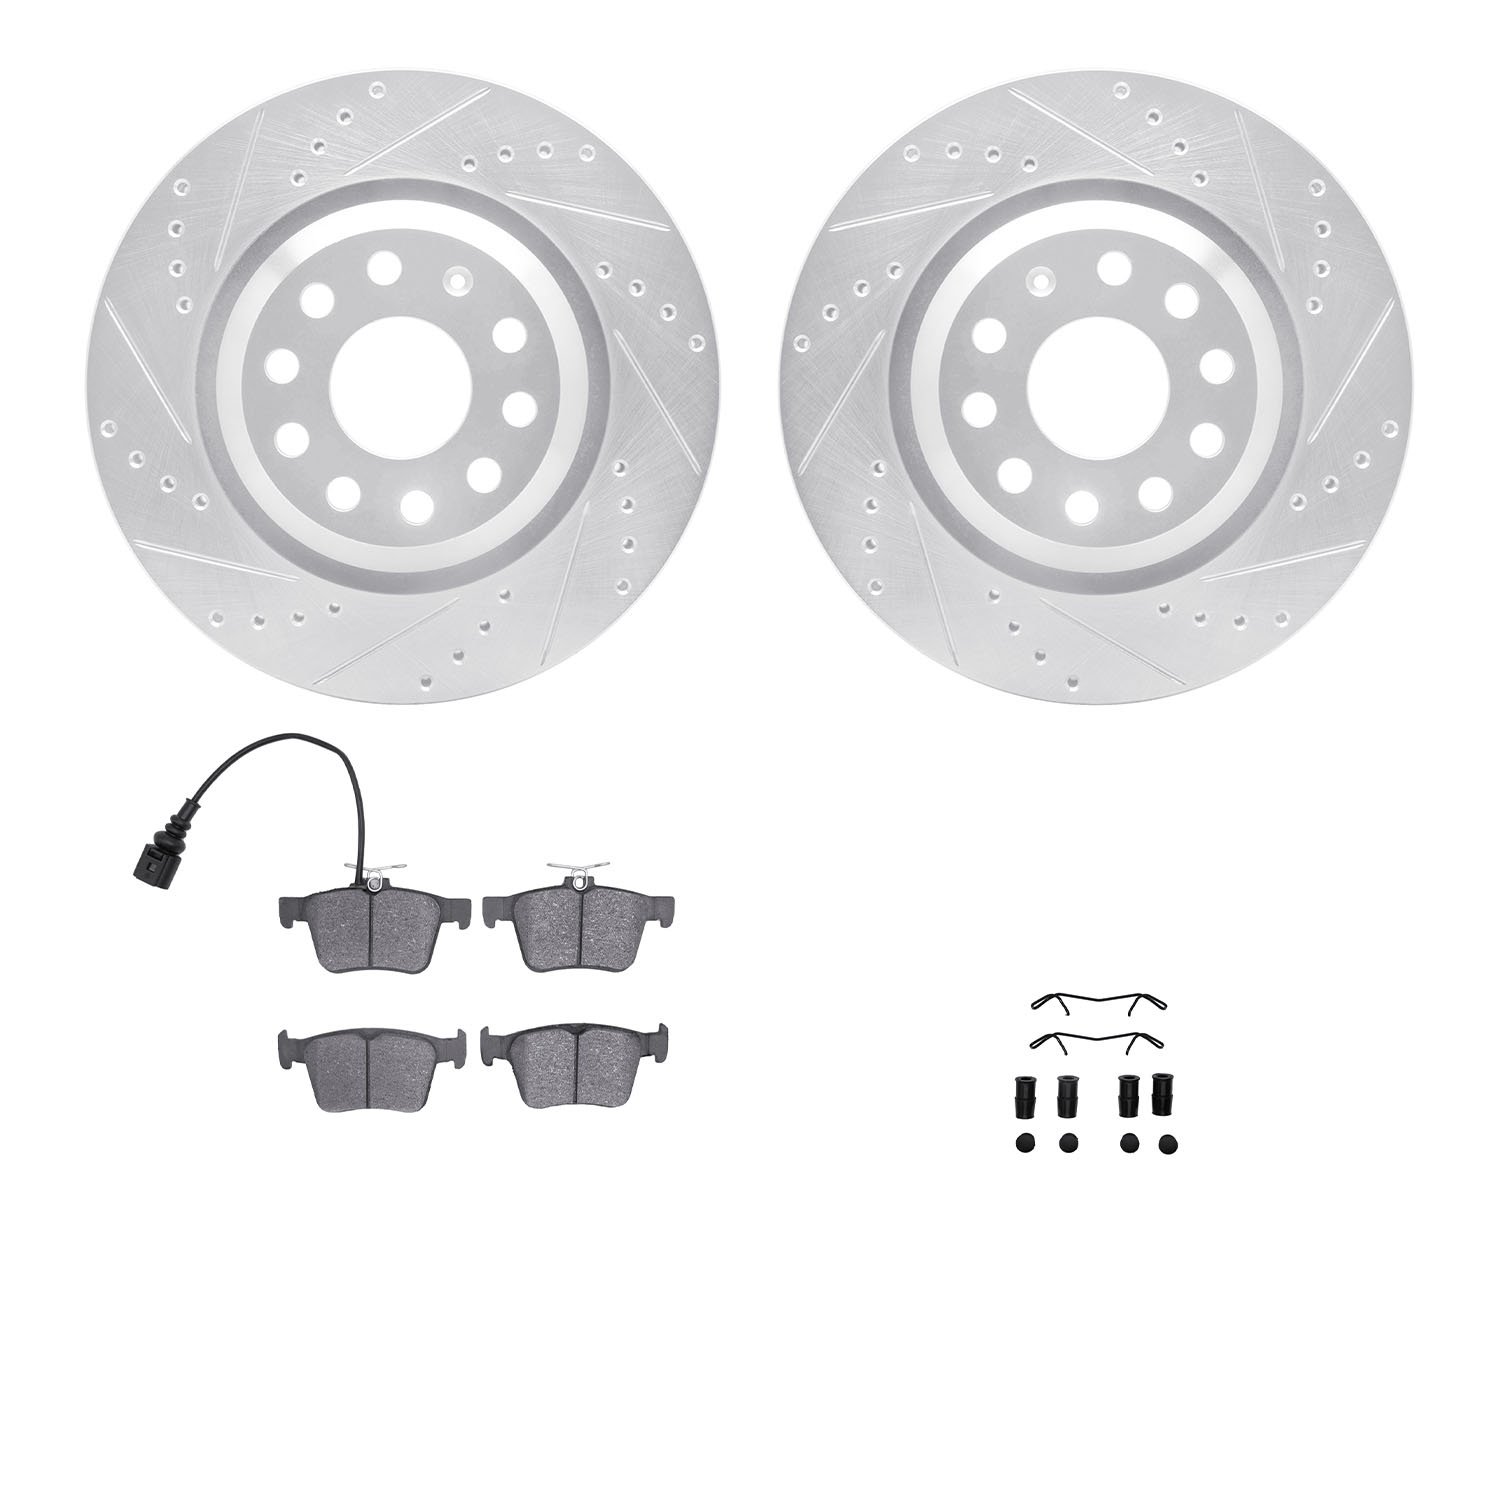 7312-74093 Drilled/Slotted Brake Rotor with 3000-Series Ceramic Brake Pads Kit & Hardware [Silver], Fits Select Audi/Volkswagen,